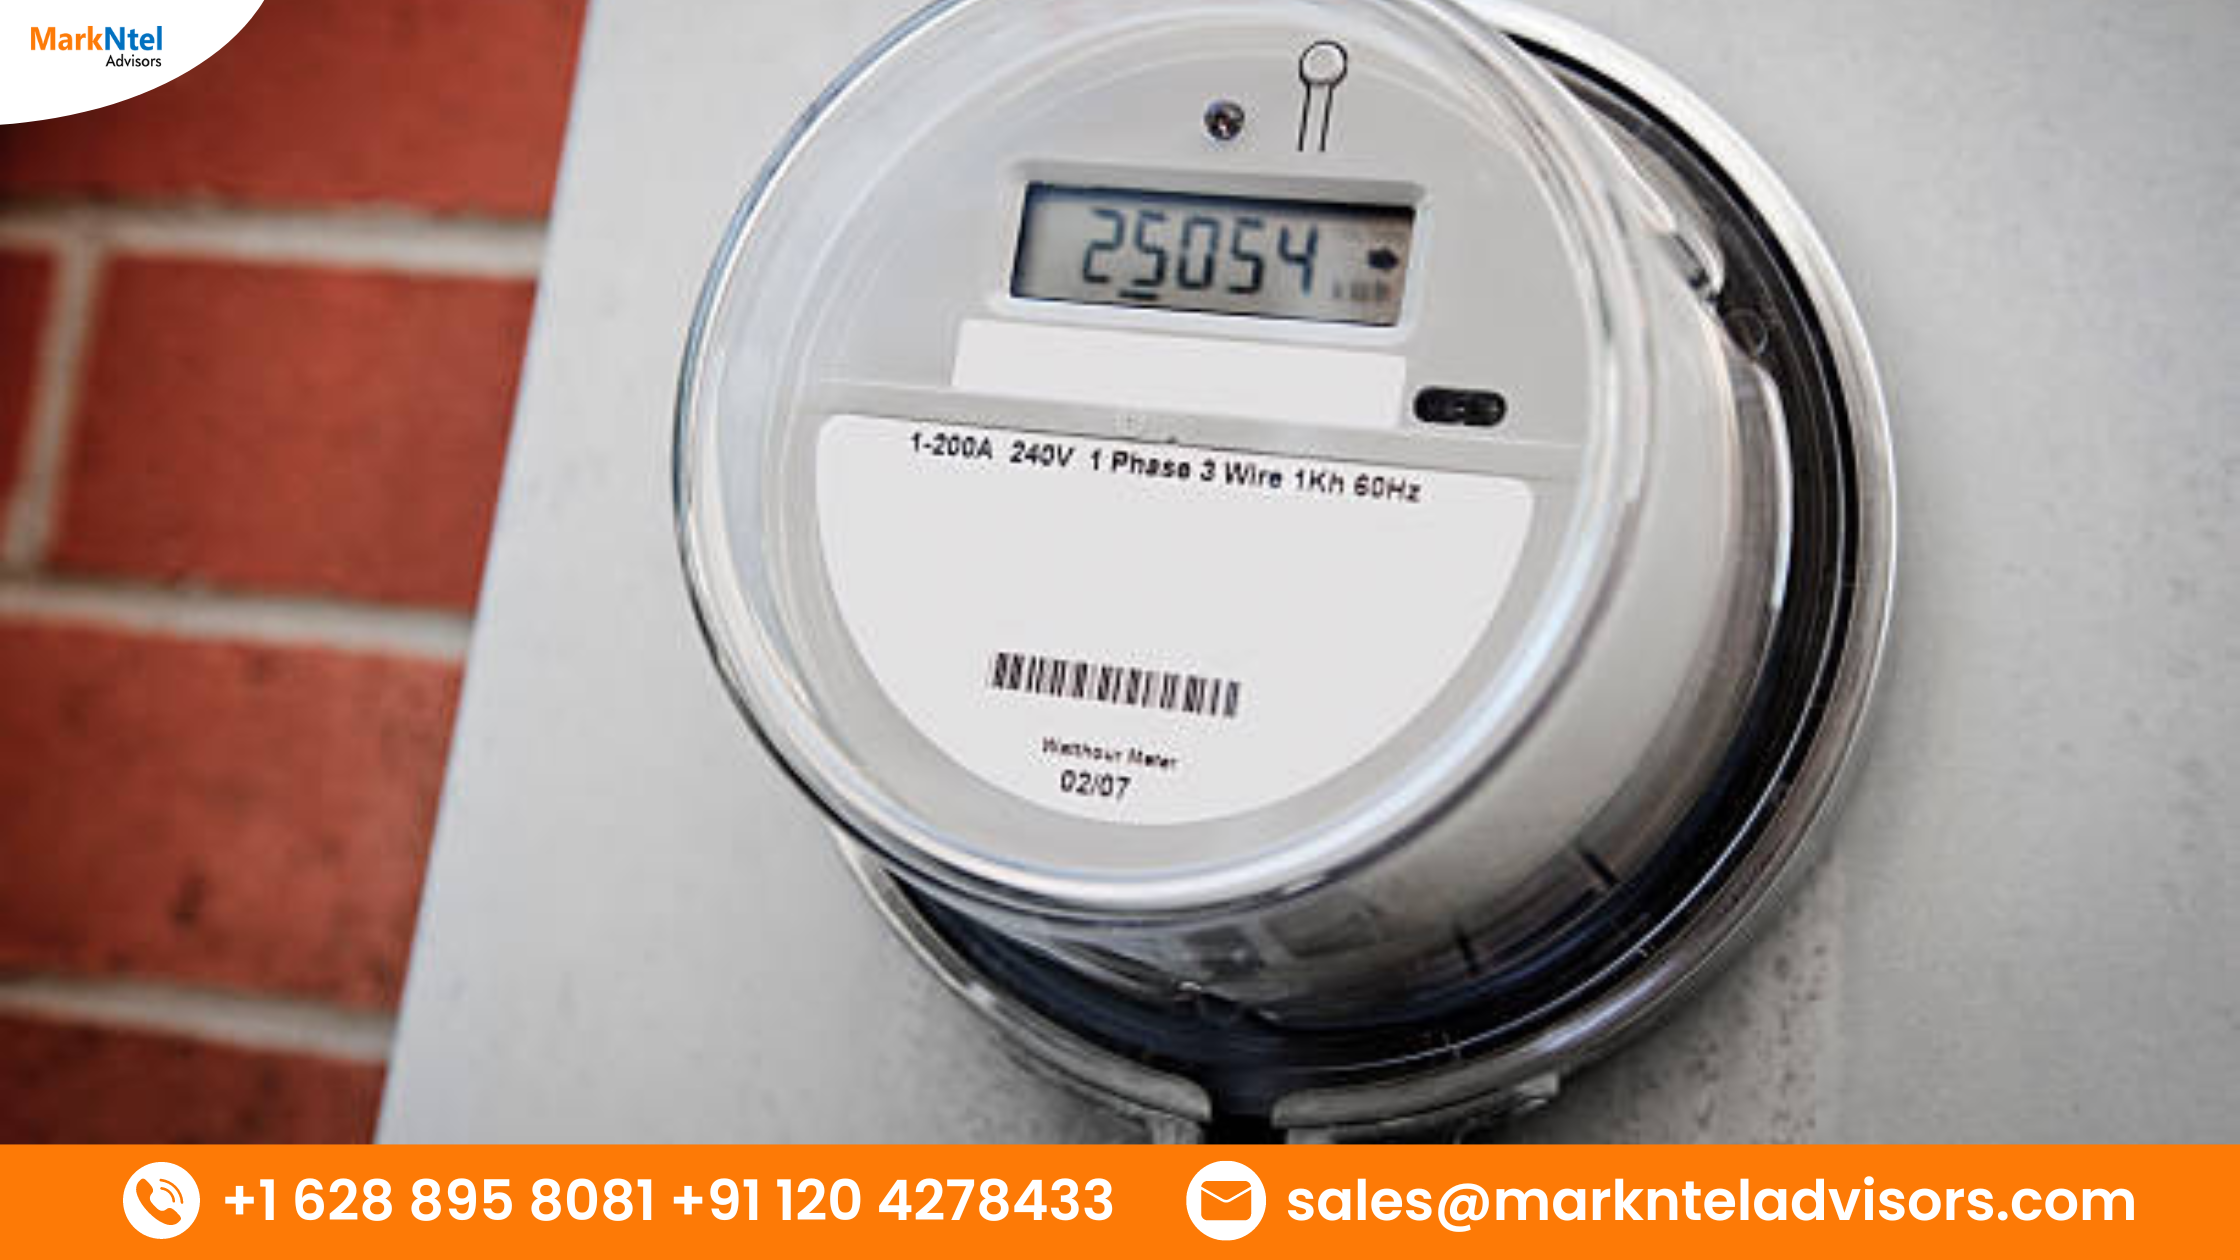 Global Smart Electricity Meter Market Analysis: Size, Share, and Demand Outlook forecast 2027